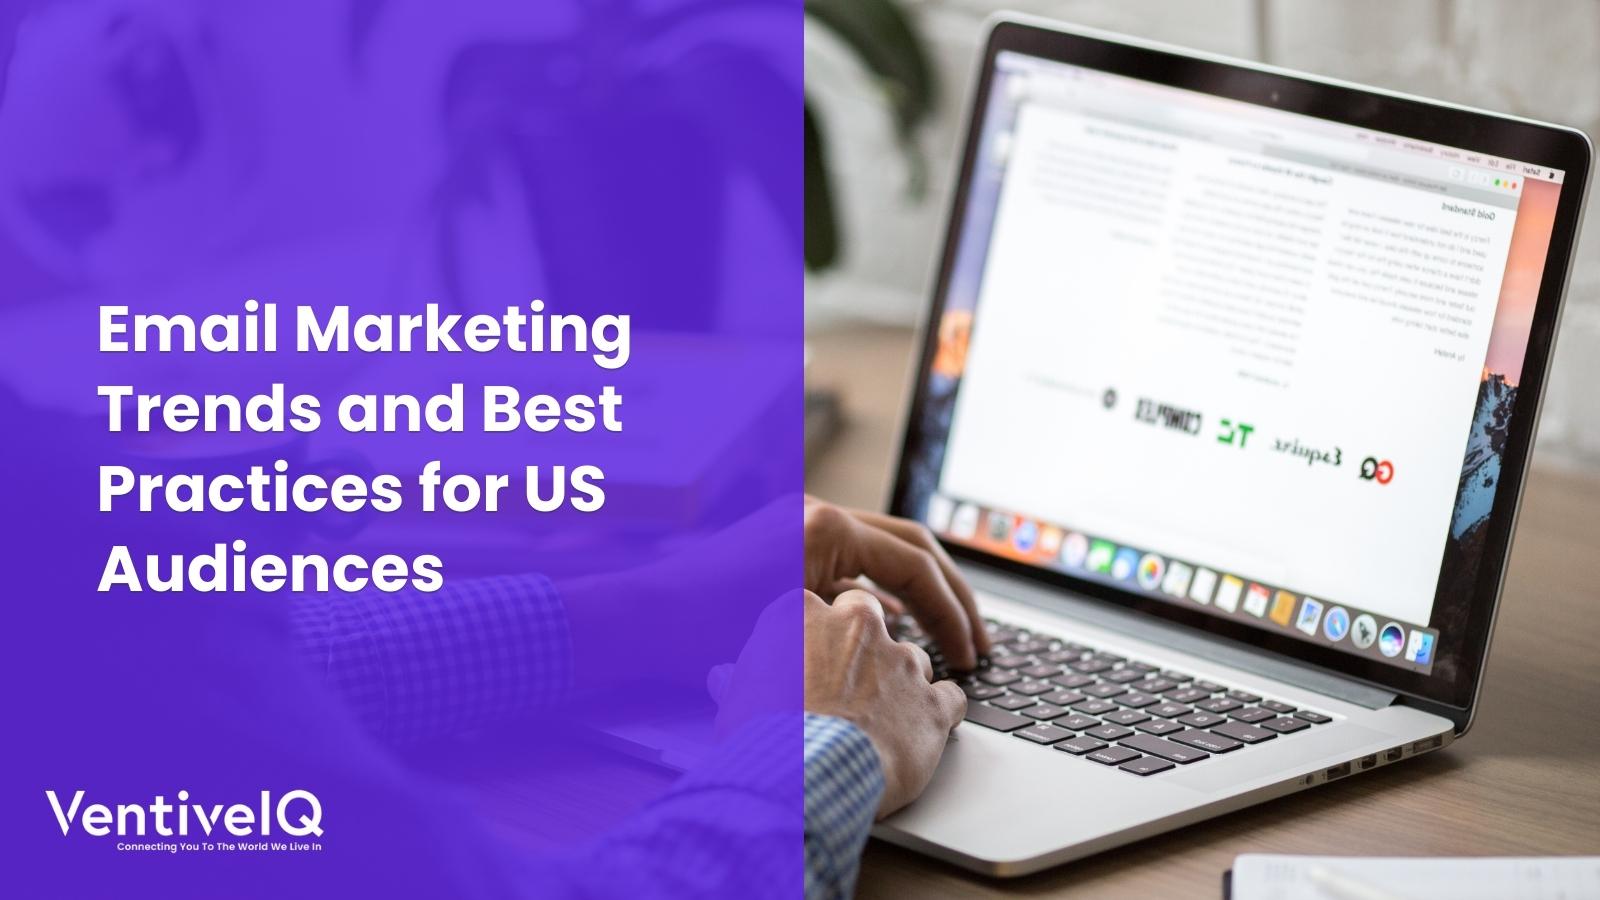 Email Marketing Trends and Best Practices for US Audiences